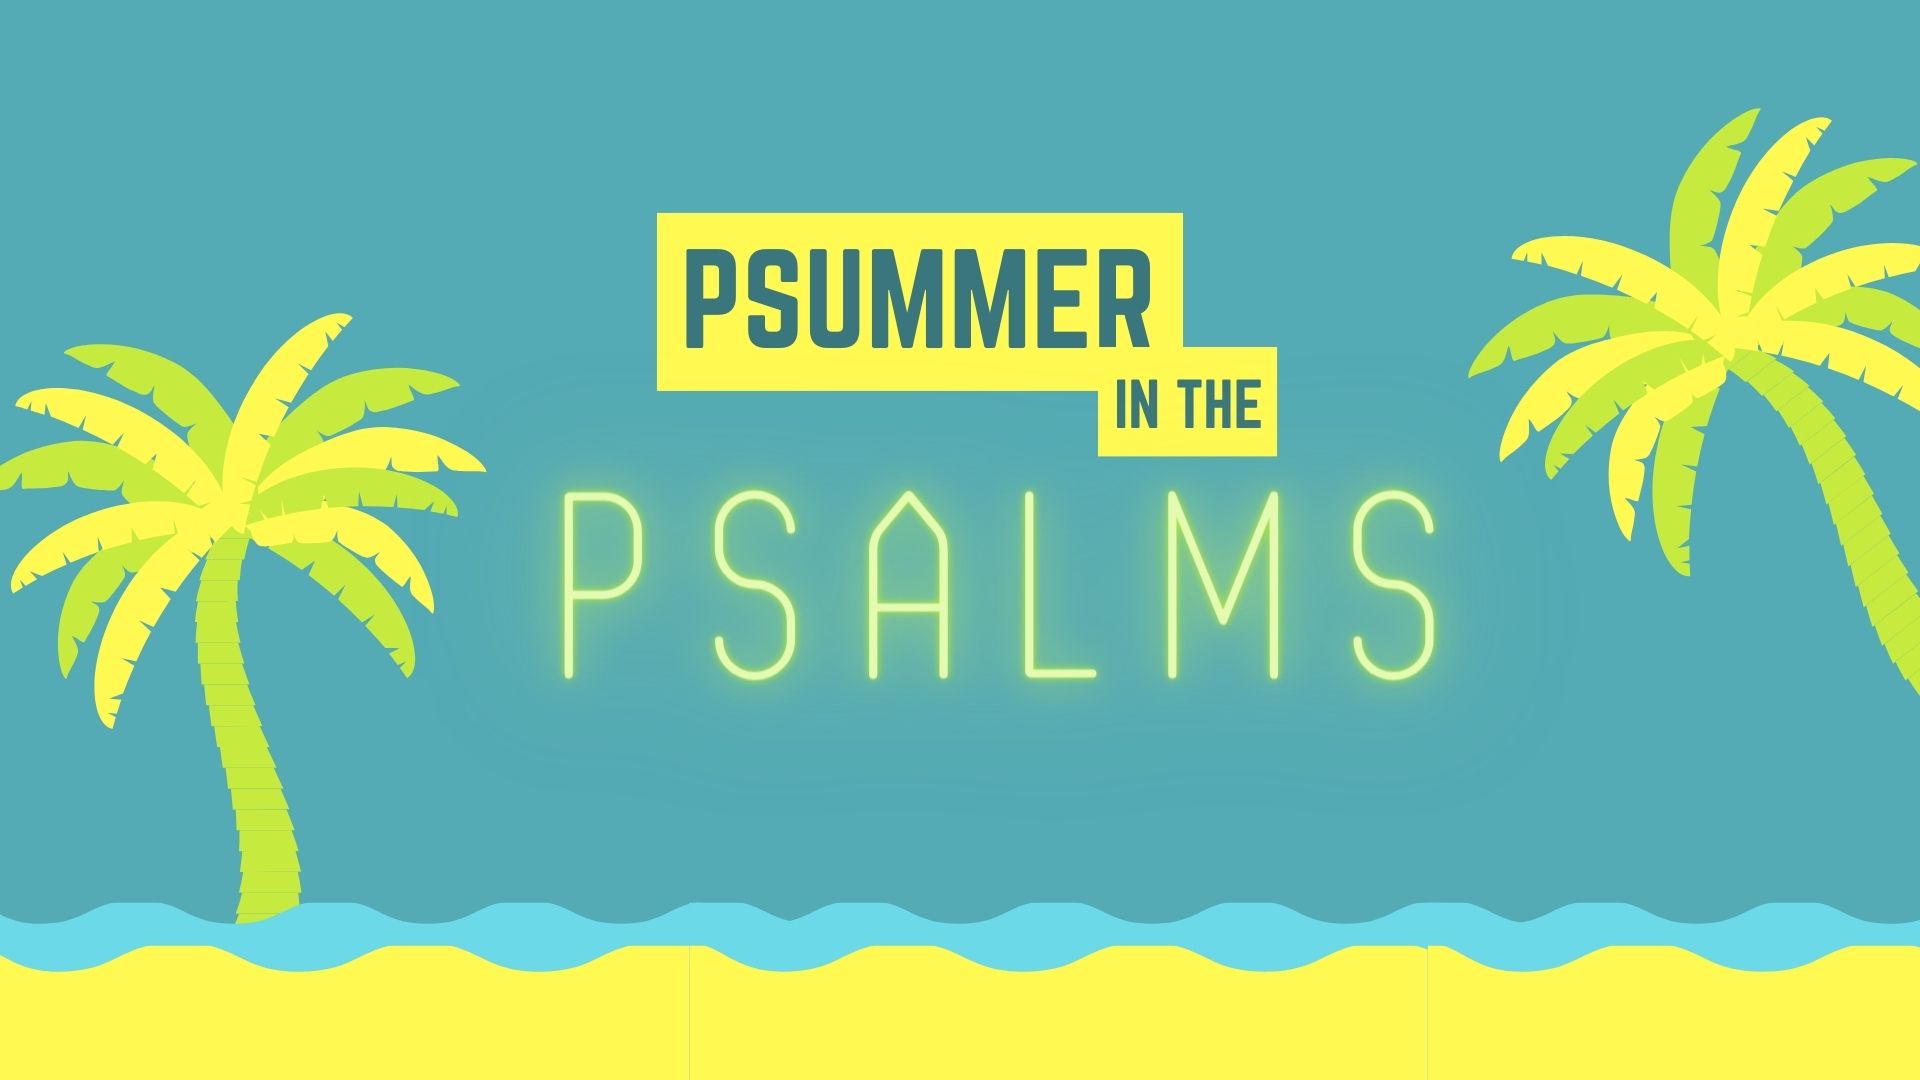 Psummer in the Psalms - Psalm 84